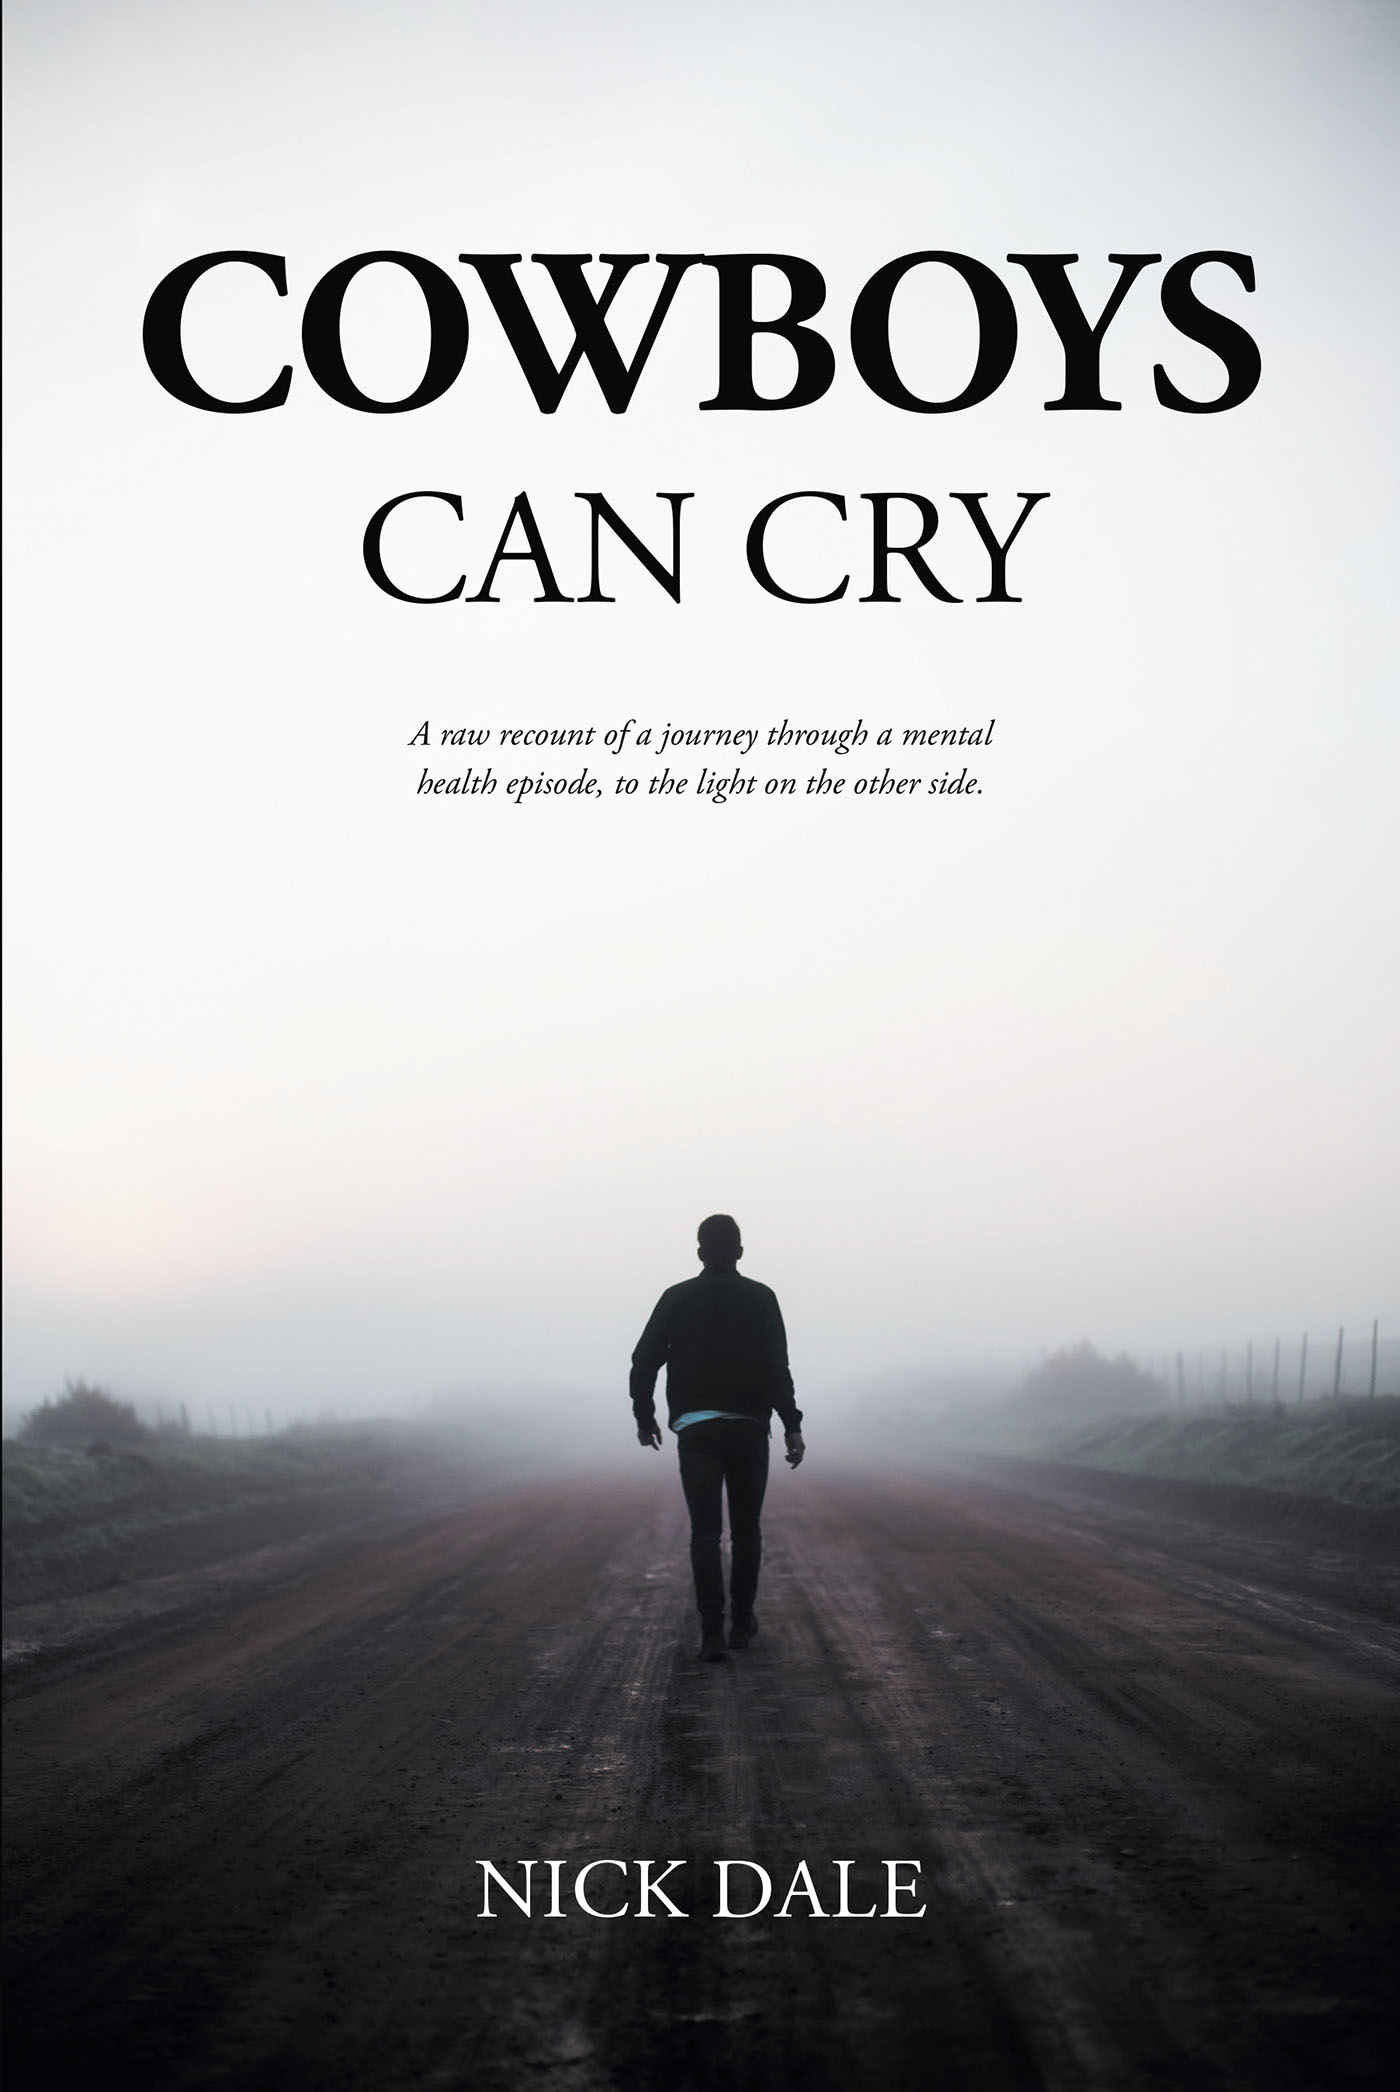 Nick Dale’s Newly Released “COWBOYS CAN CRY” is a Compassionate Reflection on a Man’s Journey Through Life’s Challenges